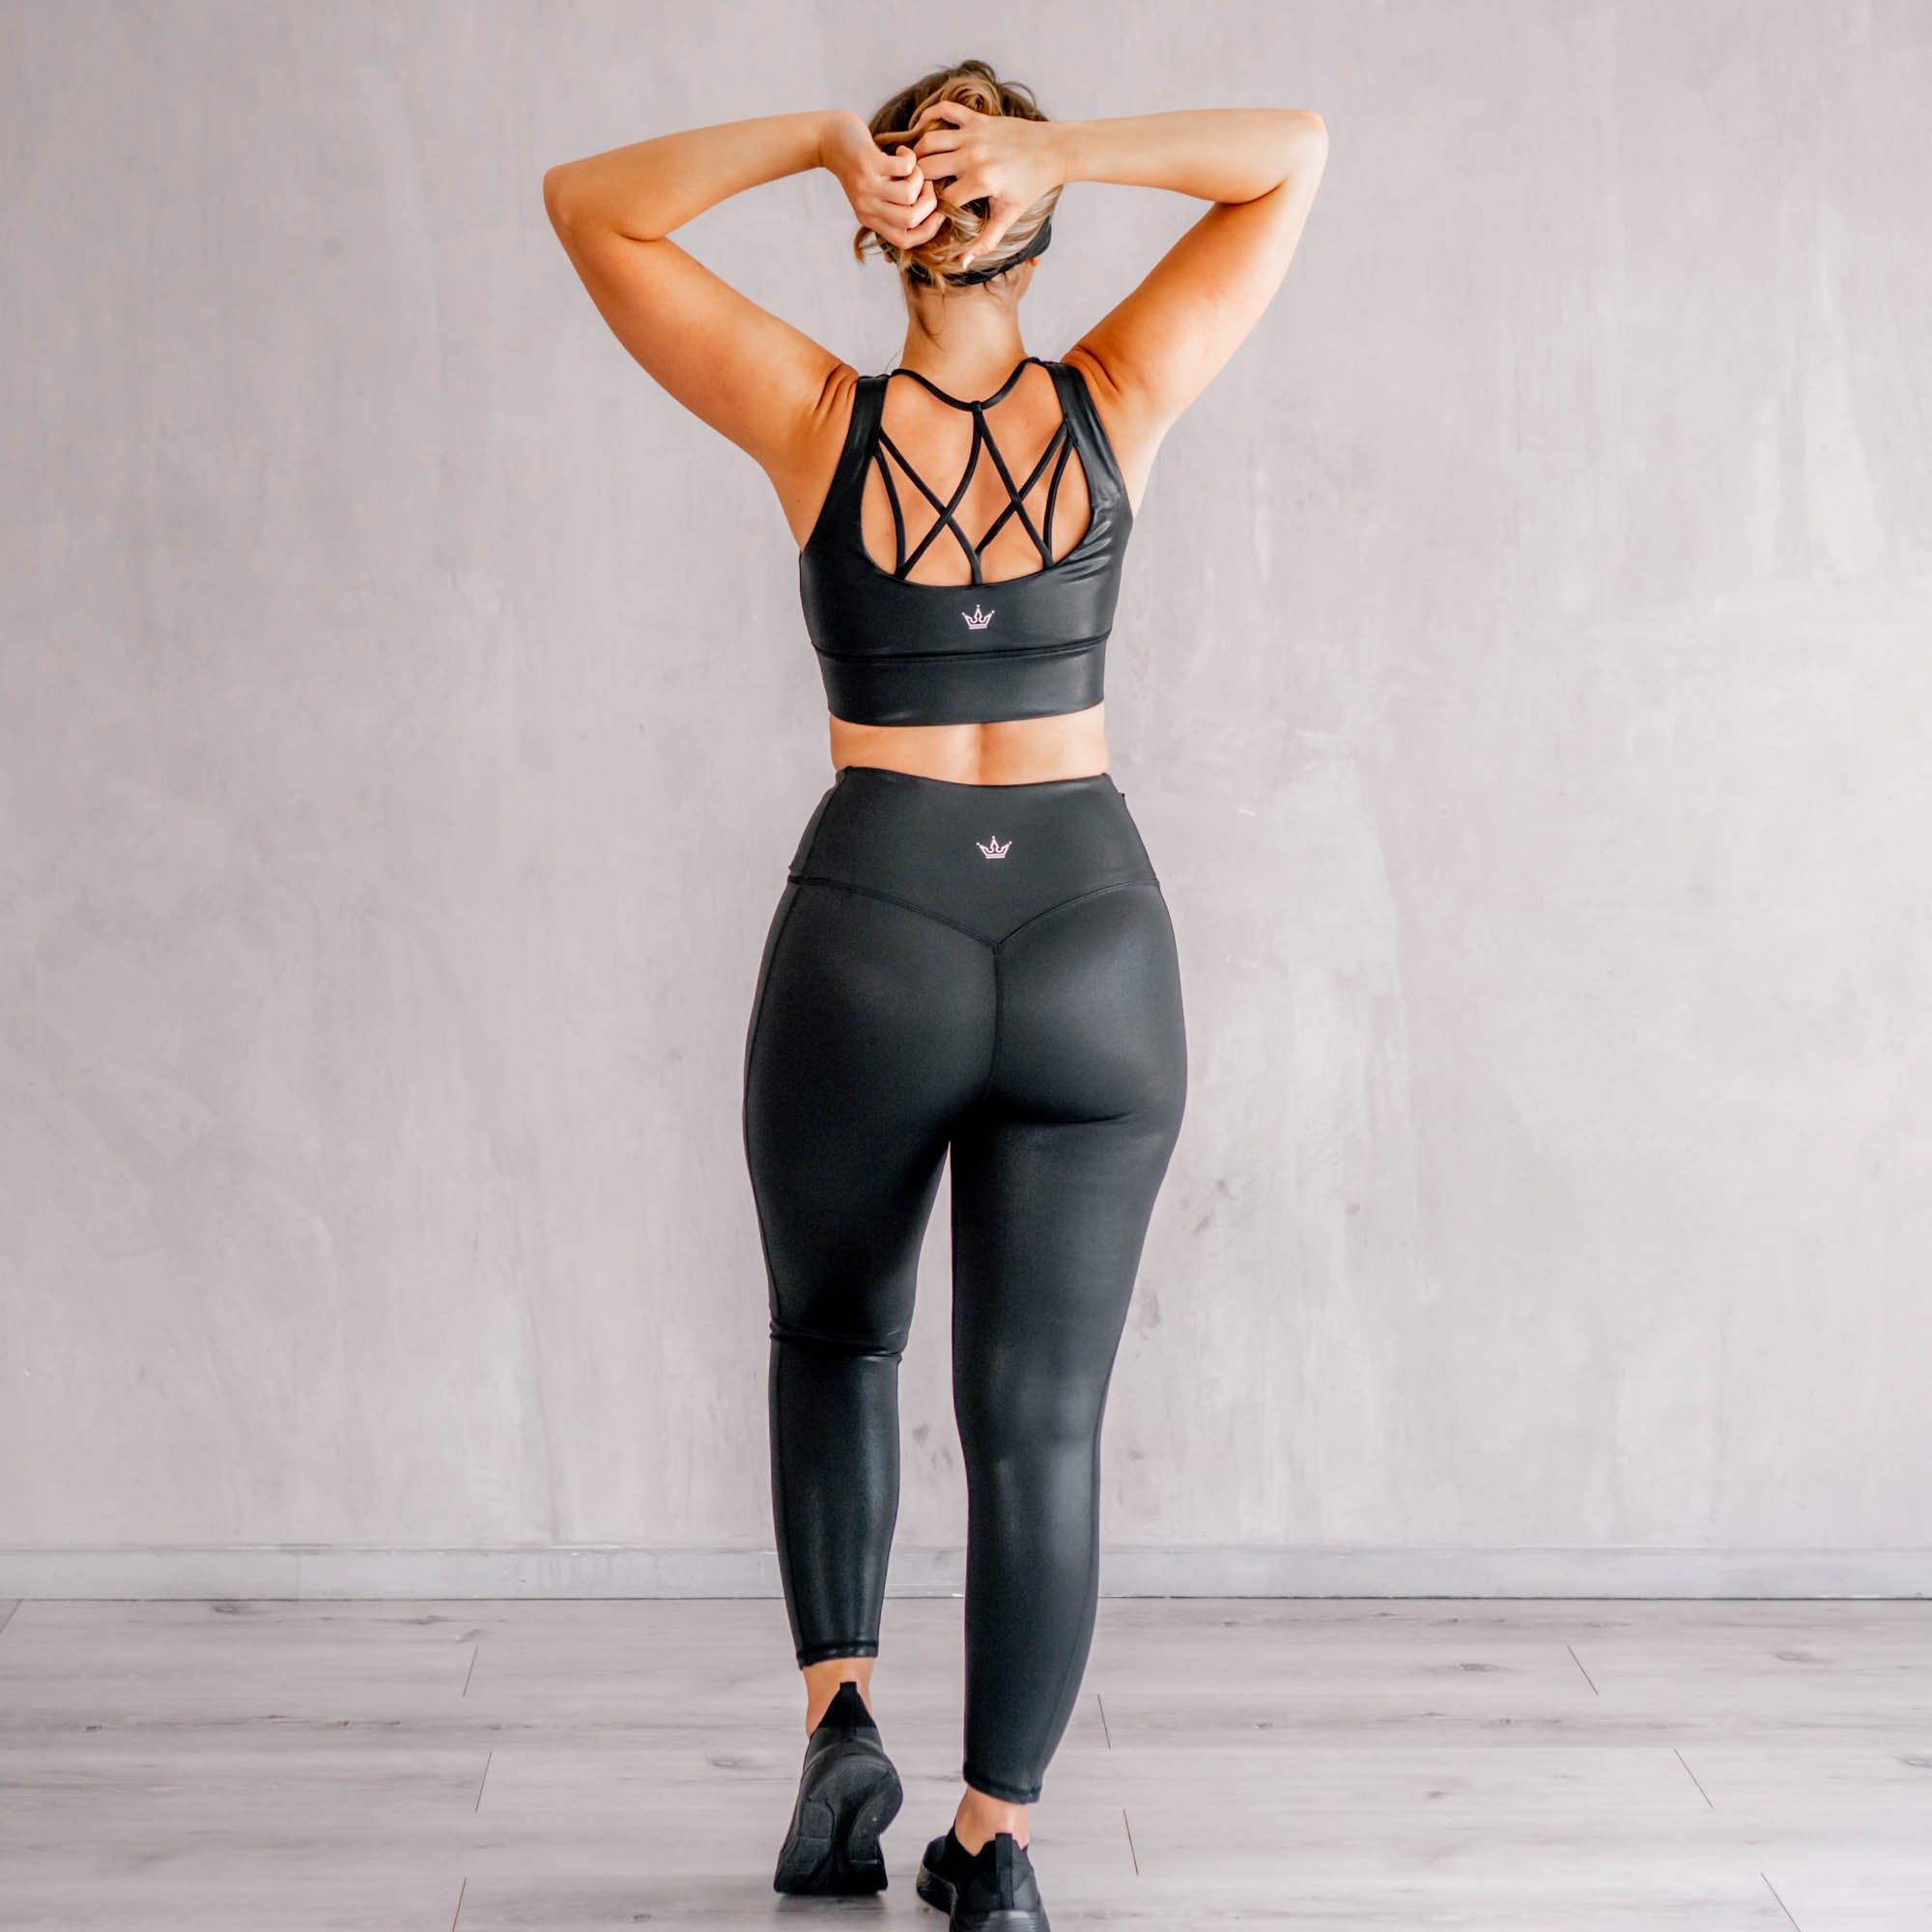 Glitter Seam Yoga Leggings For Women High Waist Sport Leck With Glossy  Glossy Tights For Workout, Gym, Exercise, And Fitness H1221 From  Mengyang10, $11.6 | DHgate.Com